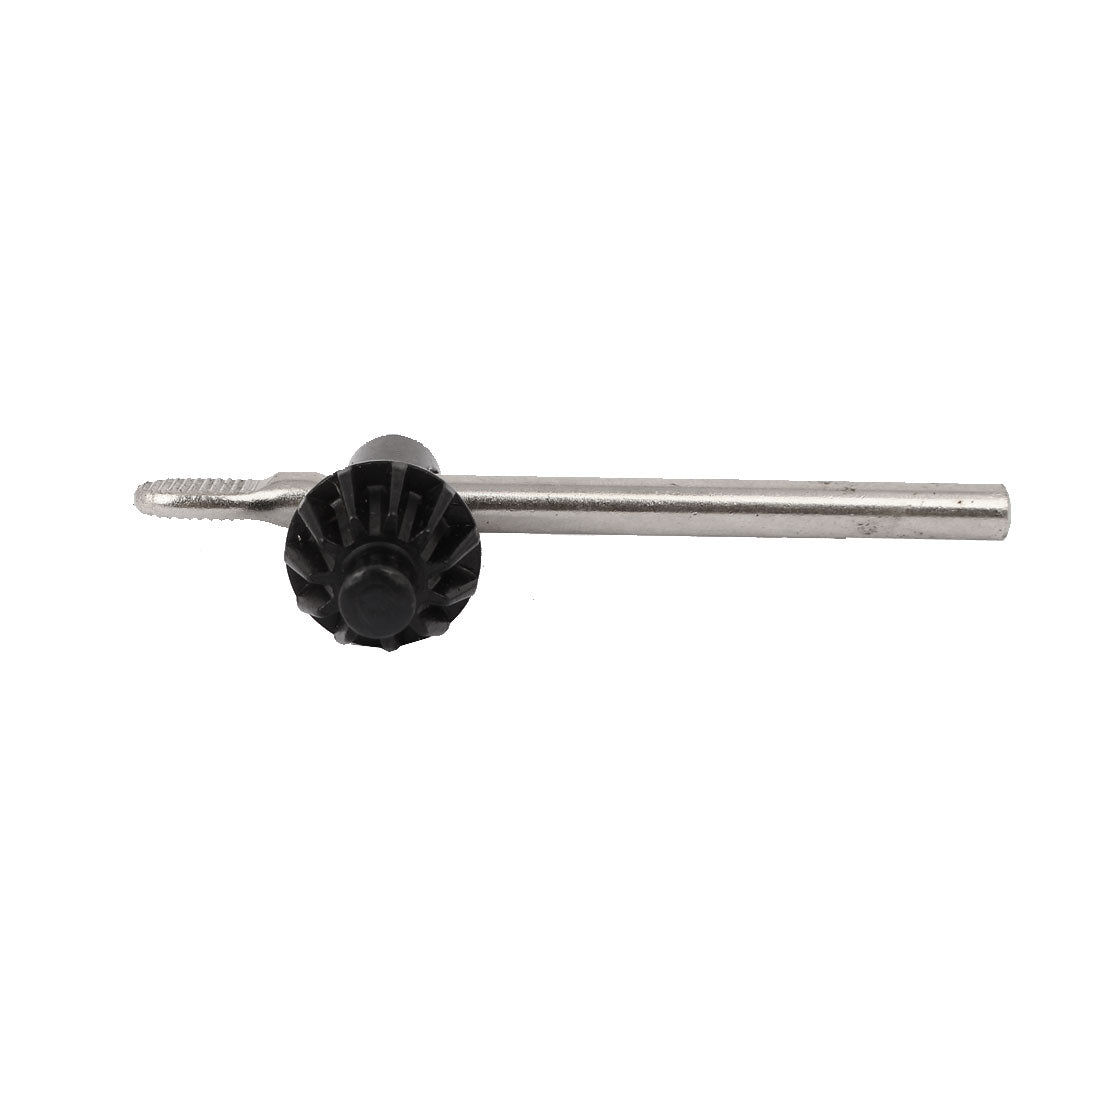 uxcell Uxcell Drill Chuck Key 8mm Key 11T 21mm Gear for Impact Driver Tools Wrench Black